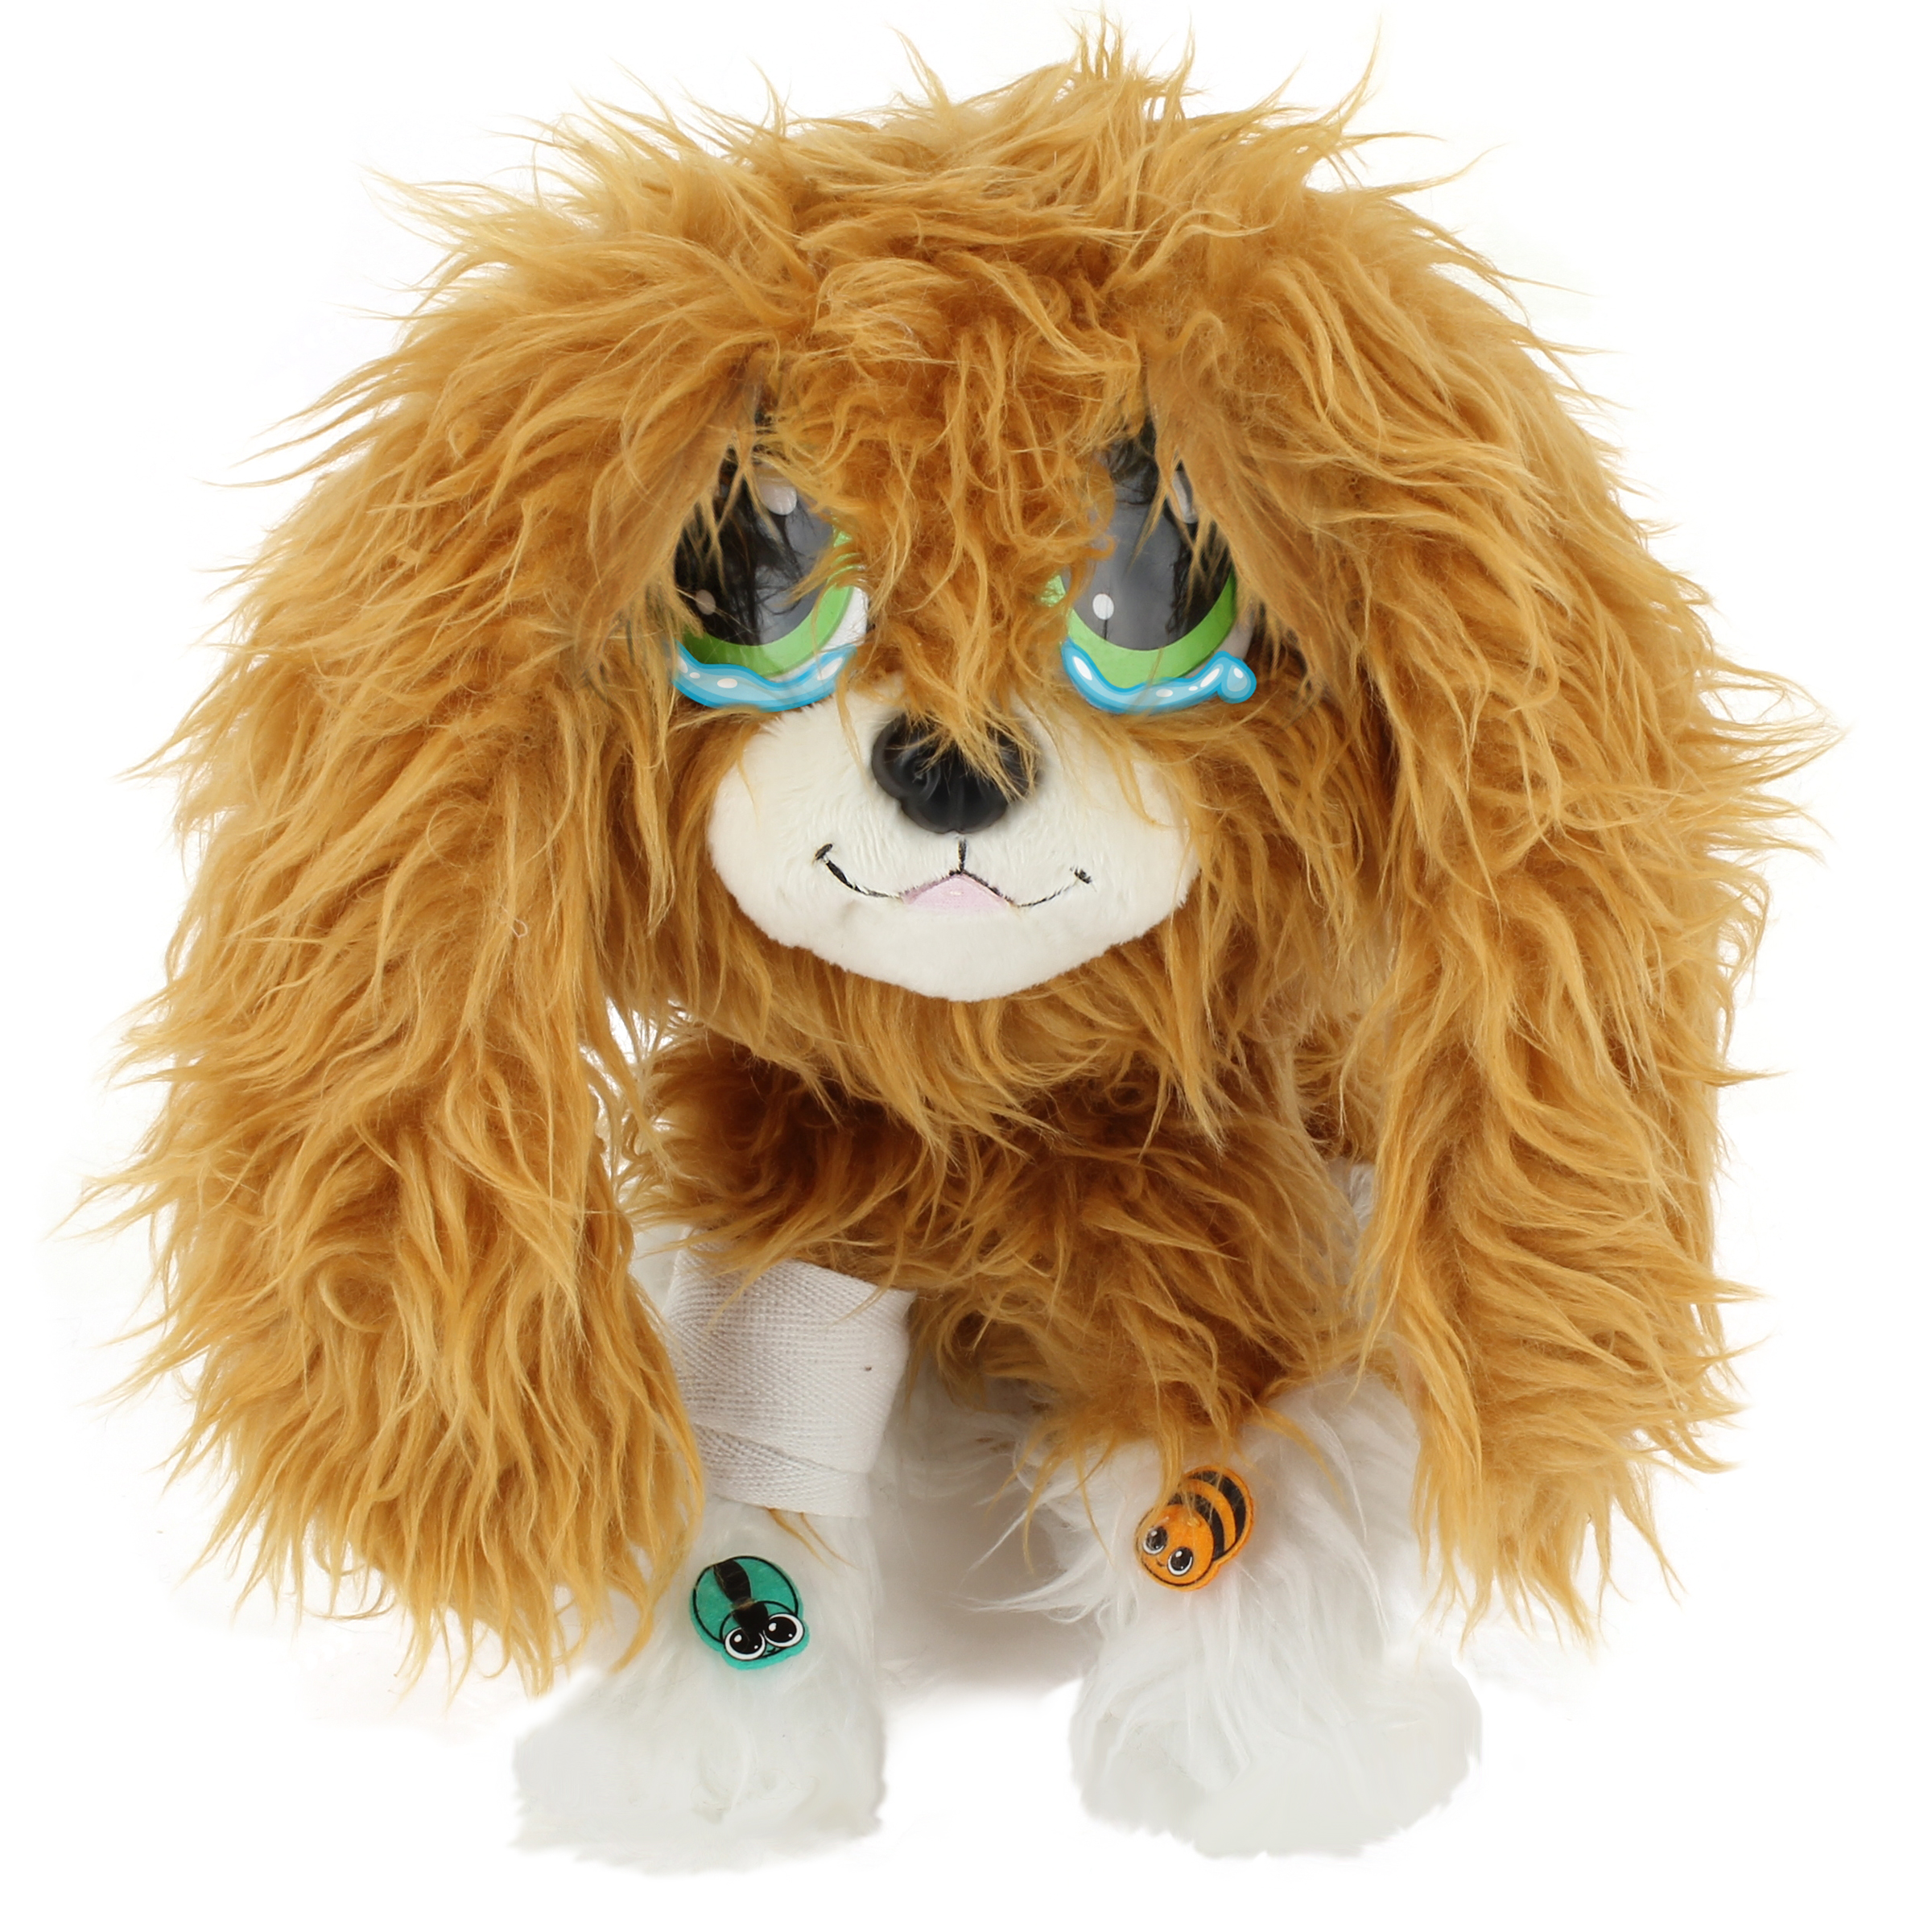 Rescue runts - spaniel - rescue dog plush by kd kids - image 5 of 8